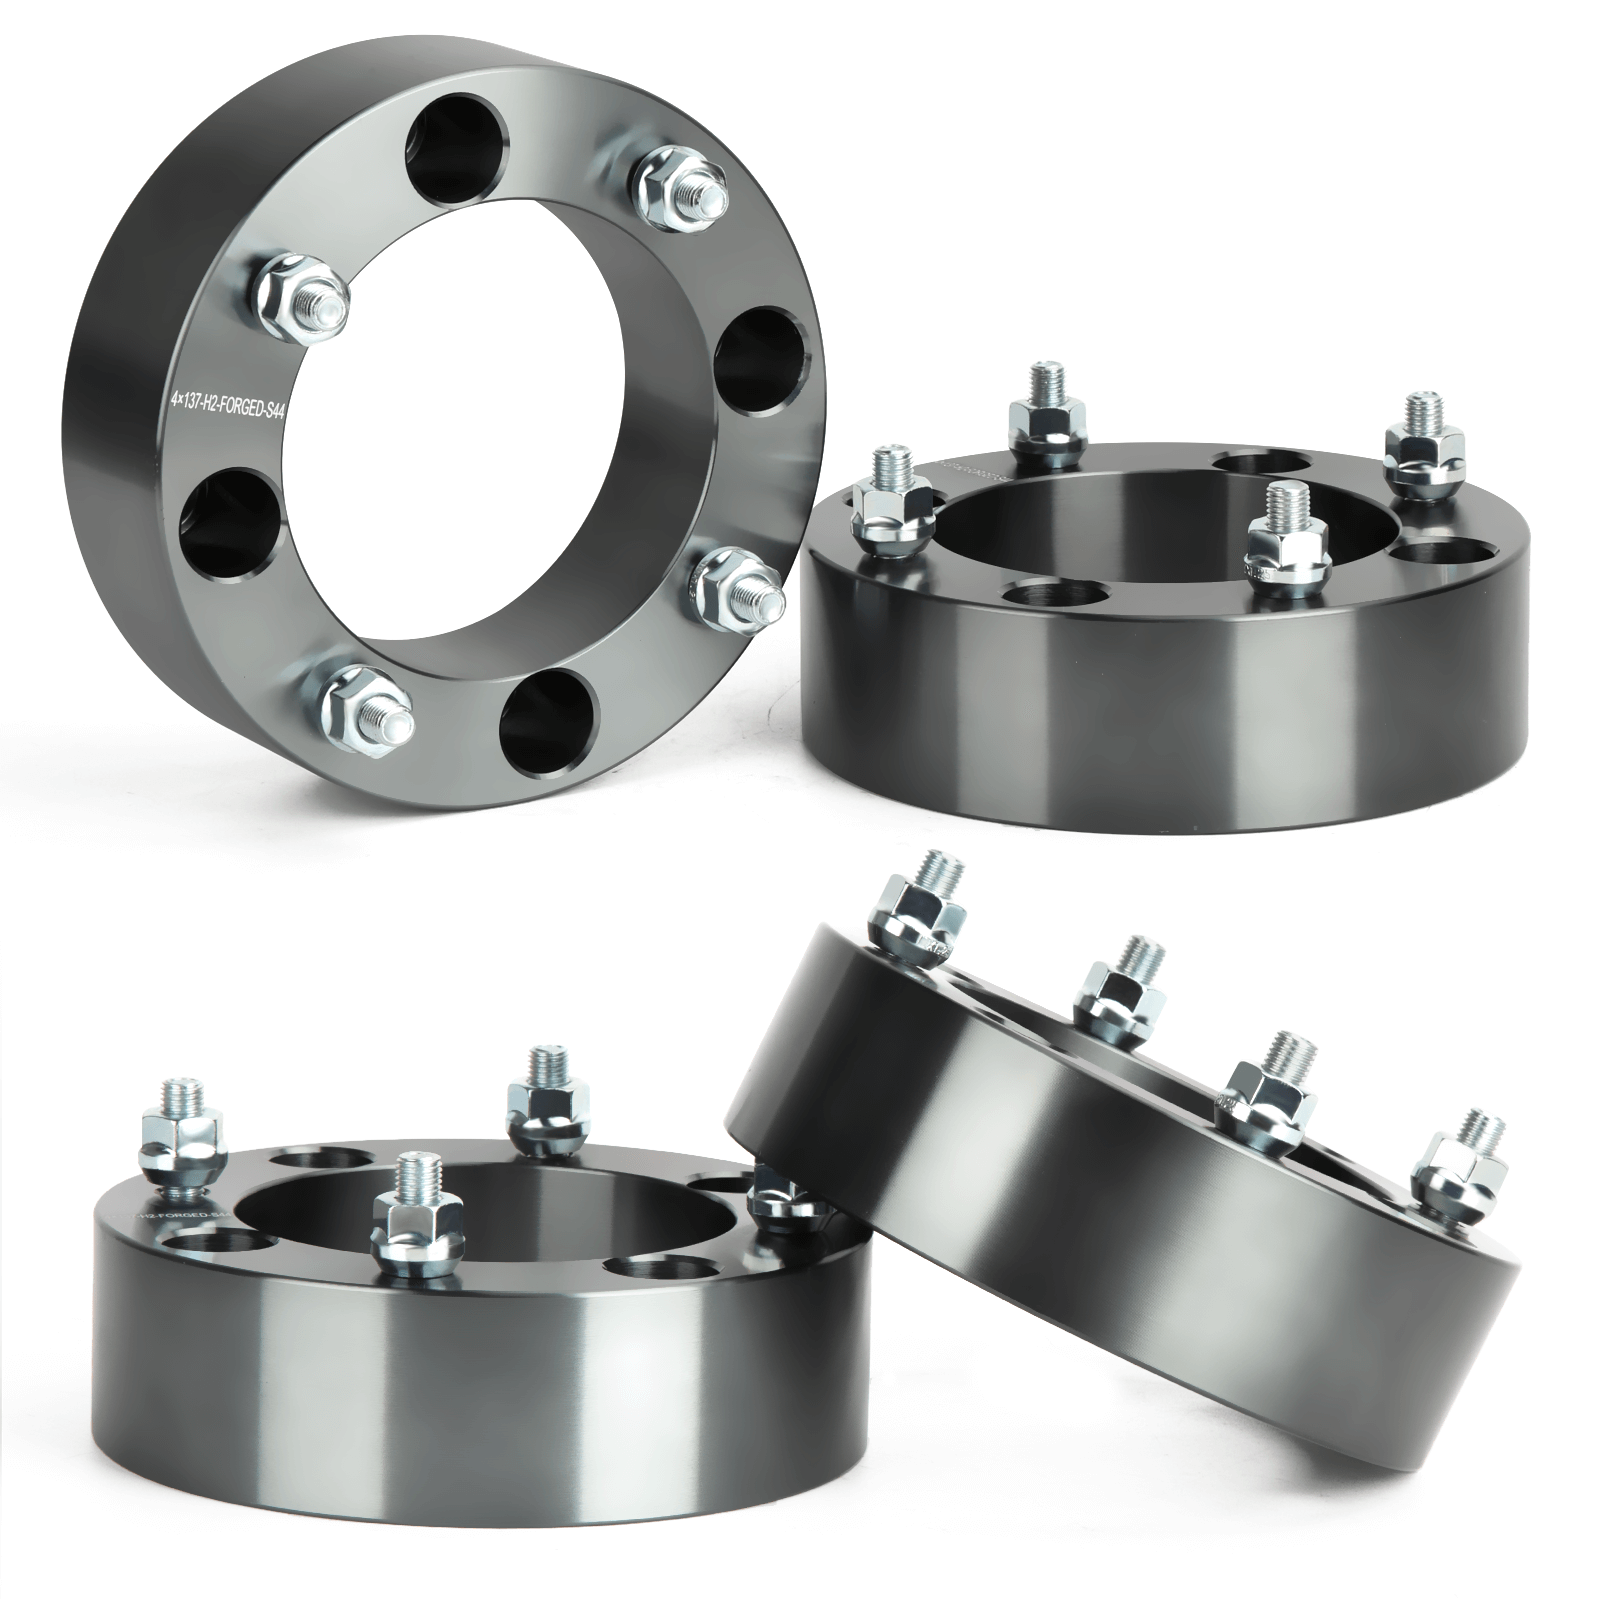 ATV Wheel Spacers 4x137mm 2 Inch with 10x1.25 Studs For Bombardier Kawasaki Can-Am Suzuki